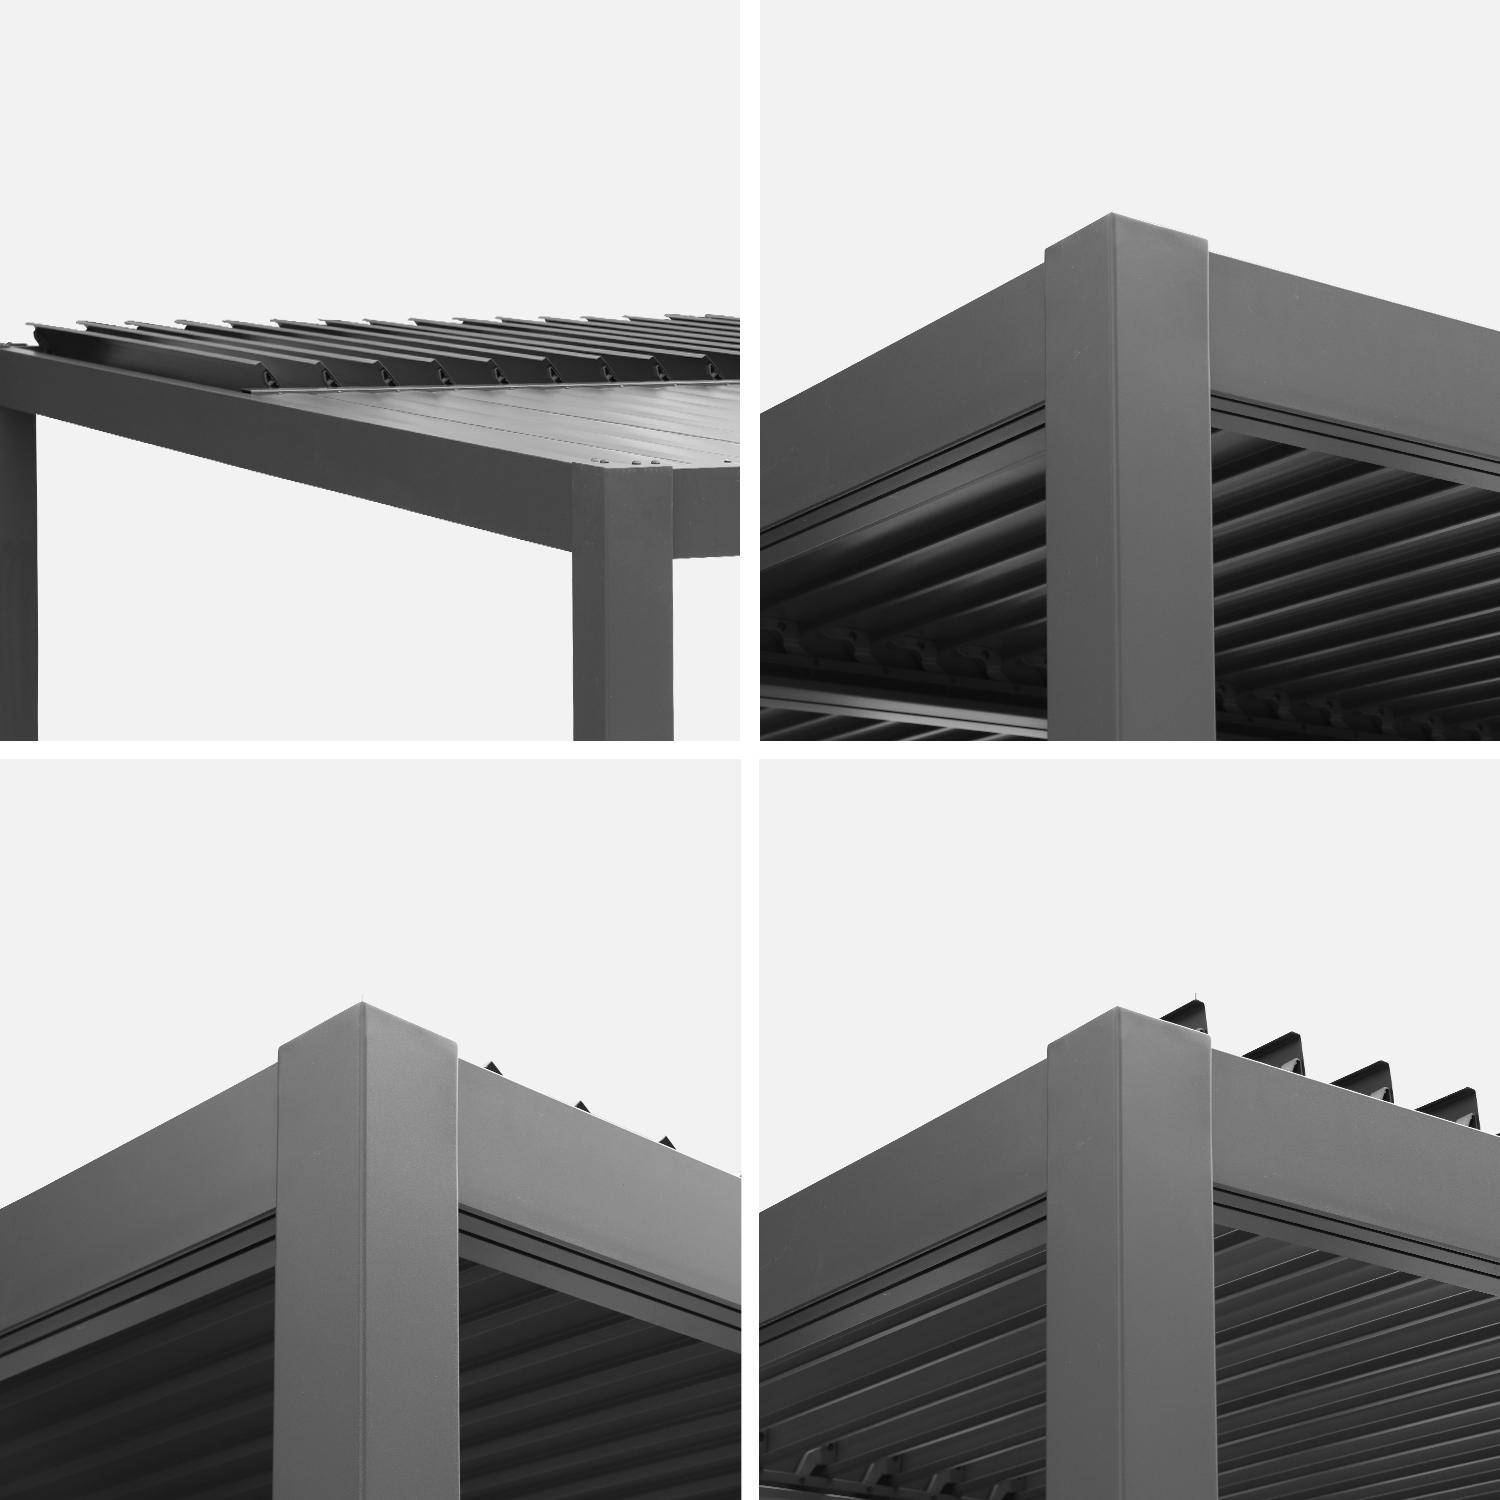 3x3 Bioclimatic Louvred Pergola with Adjustable Slats for Year-Round Outdoor Comfort, Anthracite,sweeek,Photo4